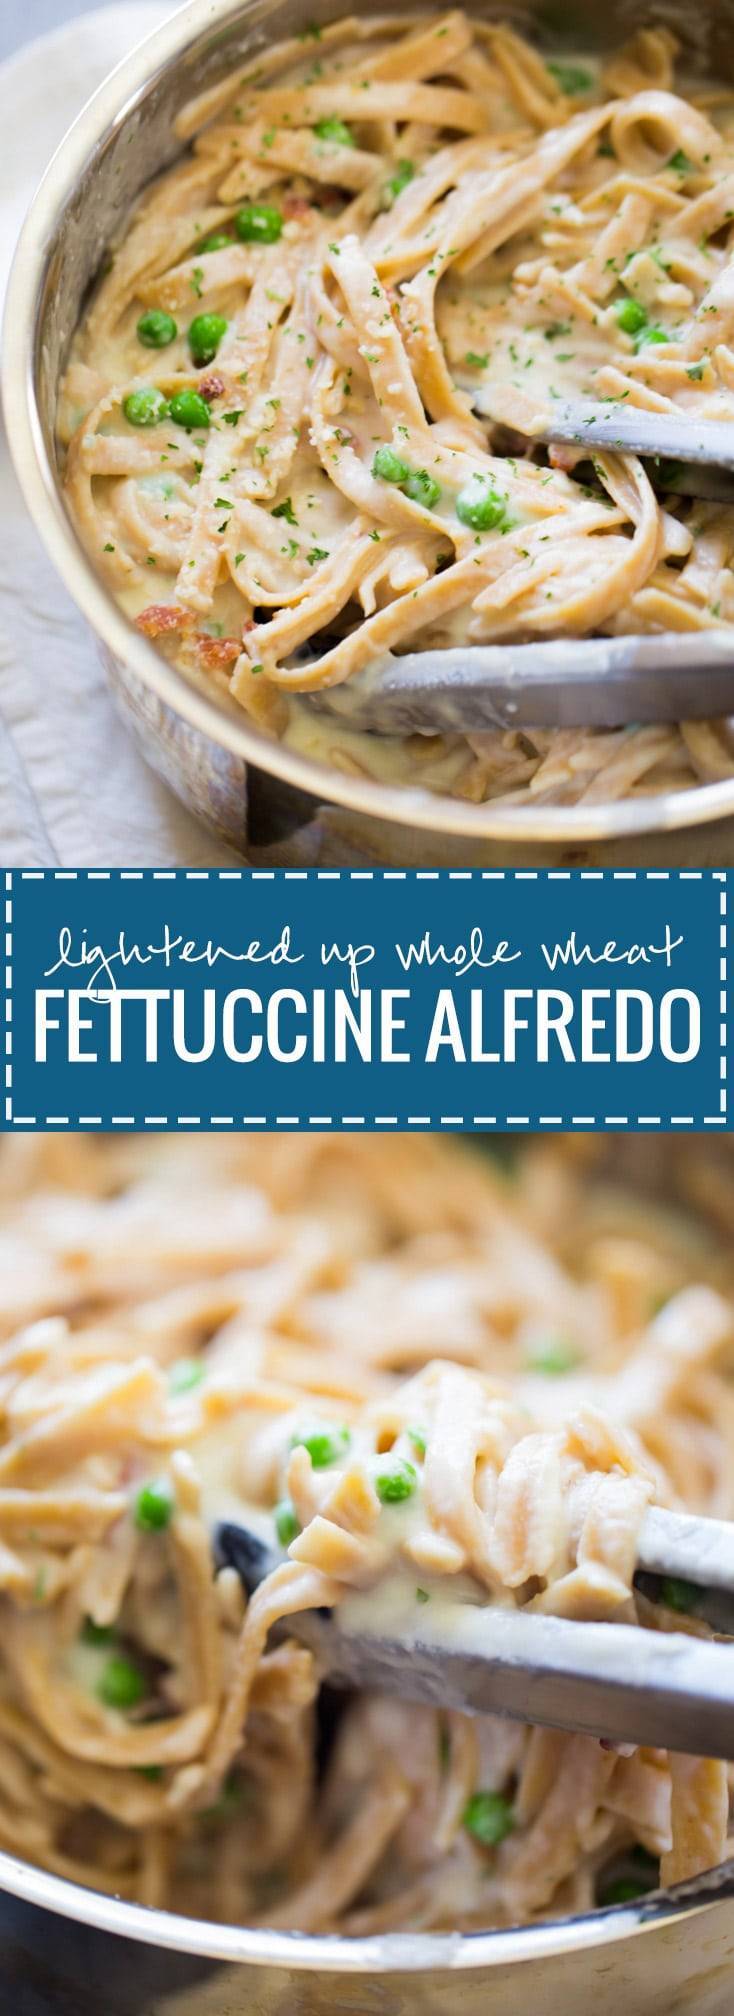 Lightened Up Whole Wheat Fettuccine Alfredo - a healthy alternative that's made with a cauliflower sauce and whole wheat noodles. 350 calories! 